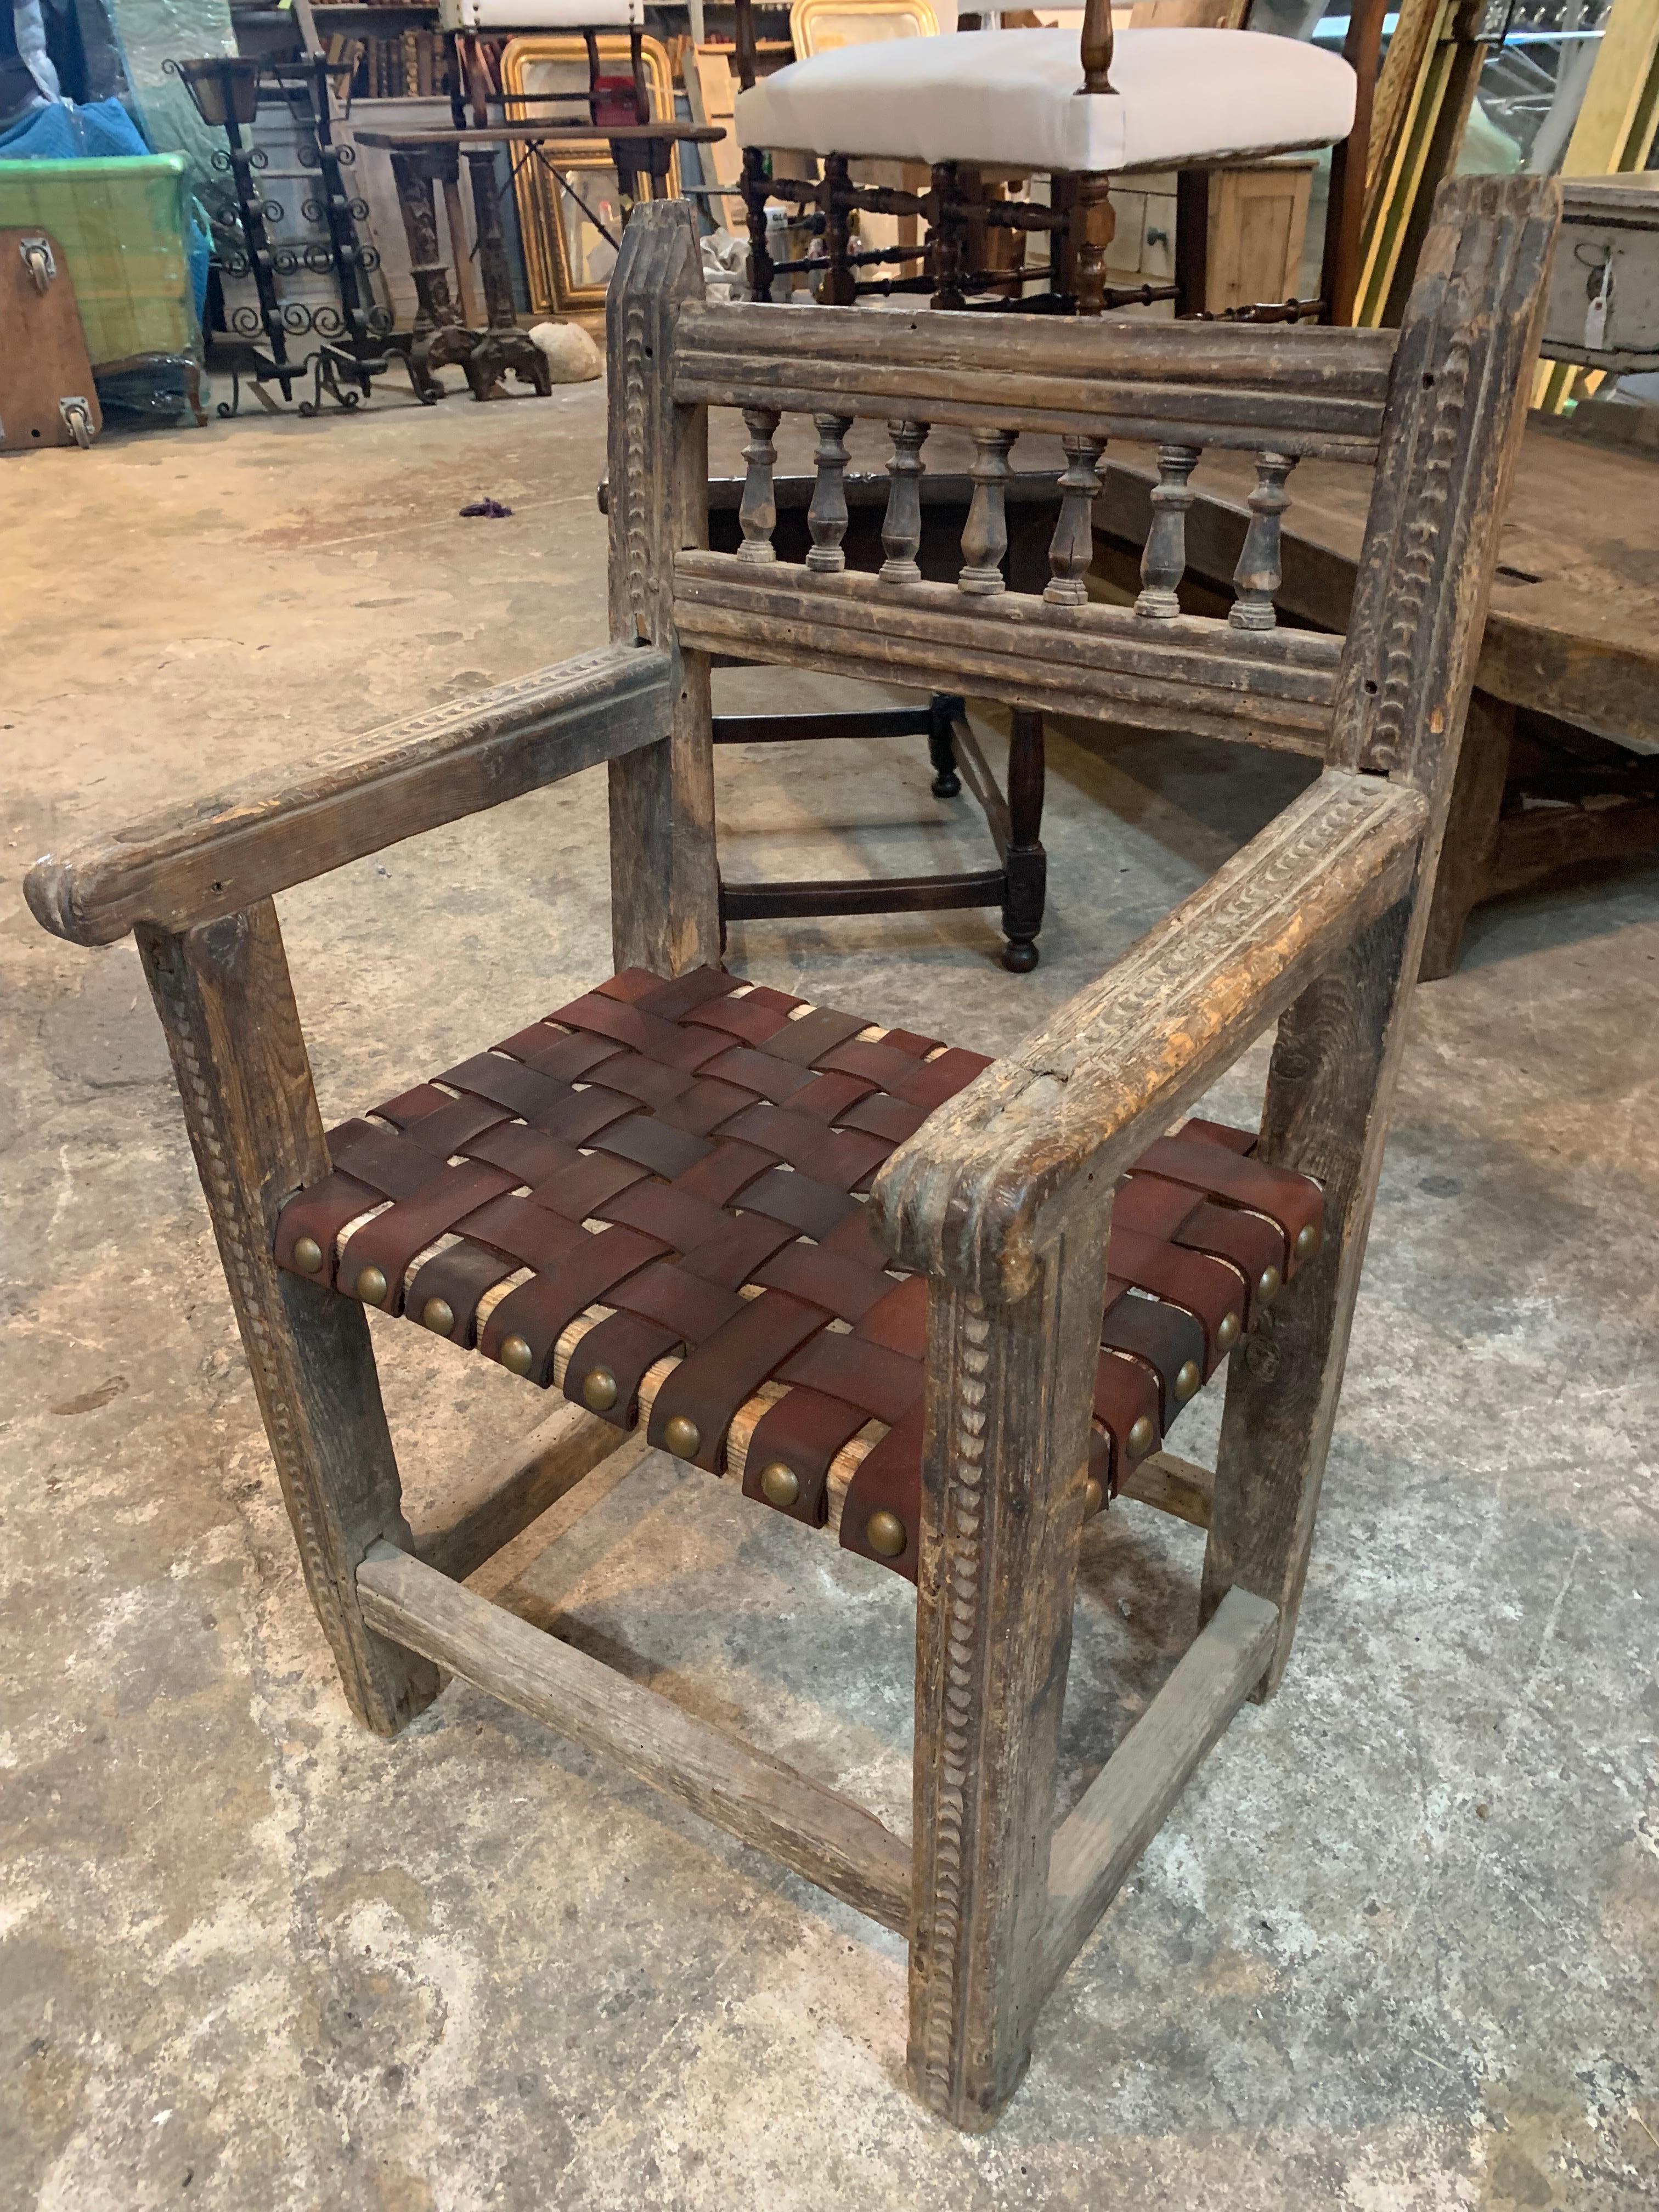 A very handsome 17th century armchair from the Catalan region of Spain. Beautifully and soundly constructed from naturally washed oak and leather strapping with handsome nail head detailing. Wonderful as an accent chair or desk chair.